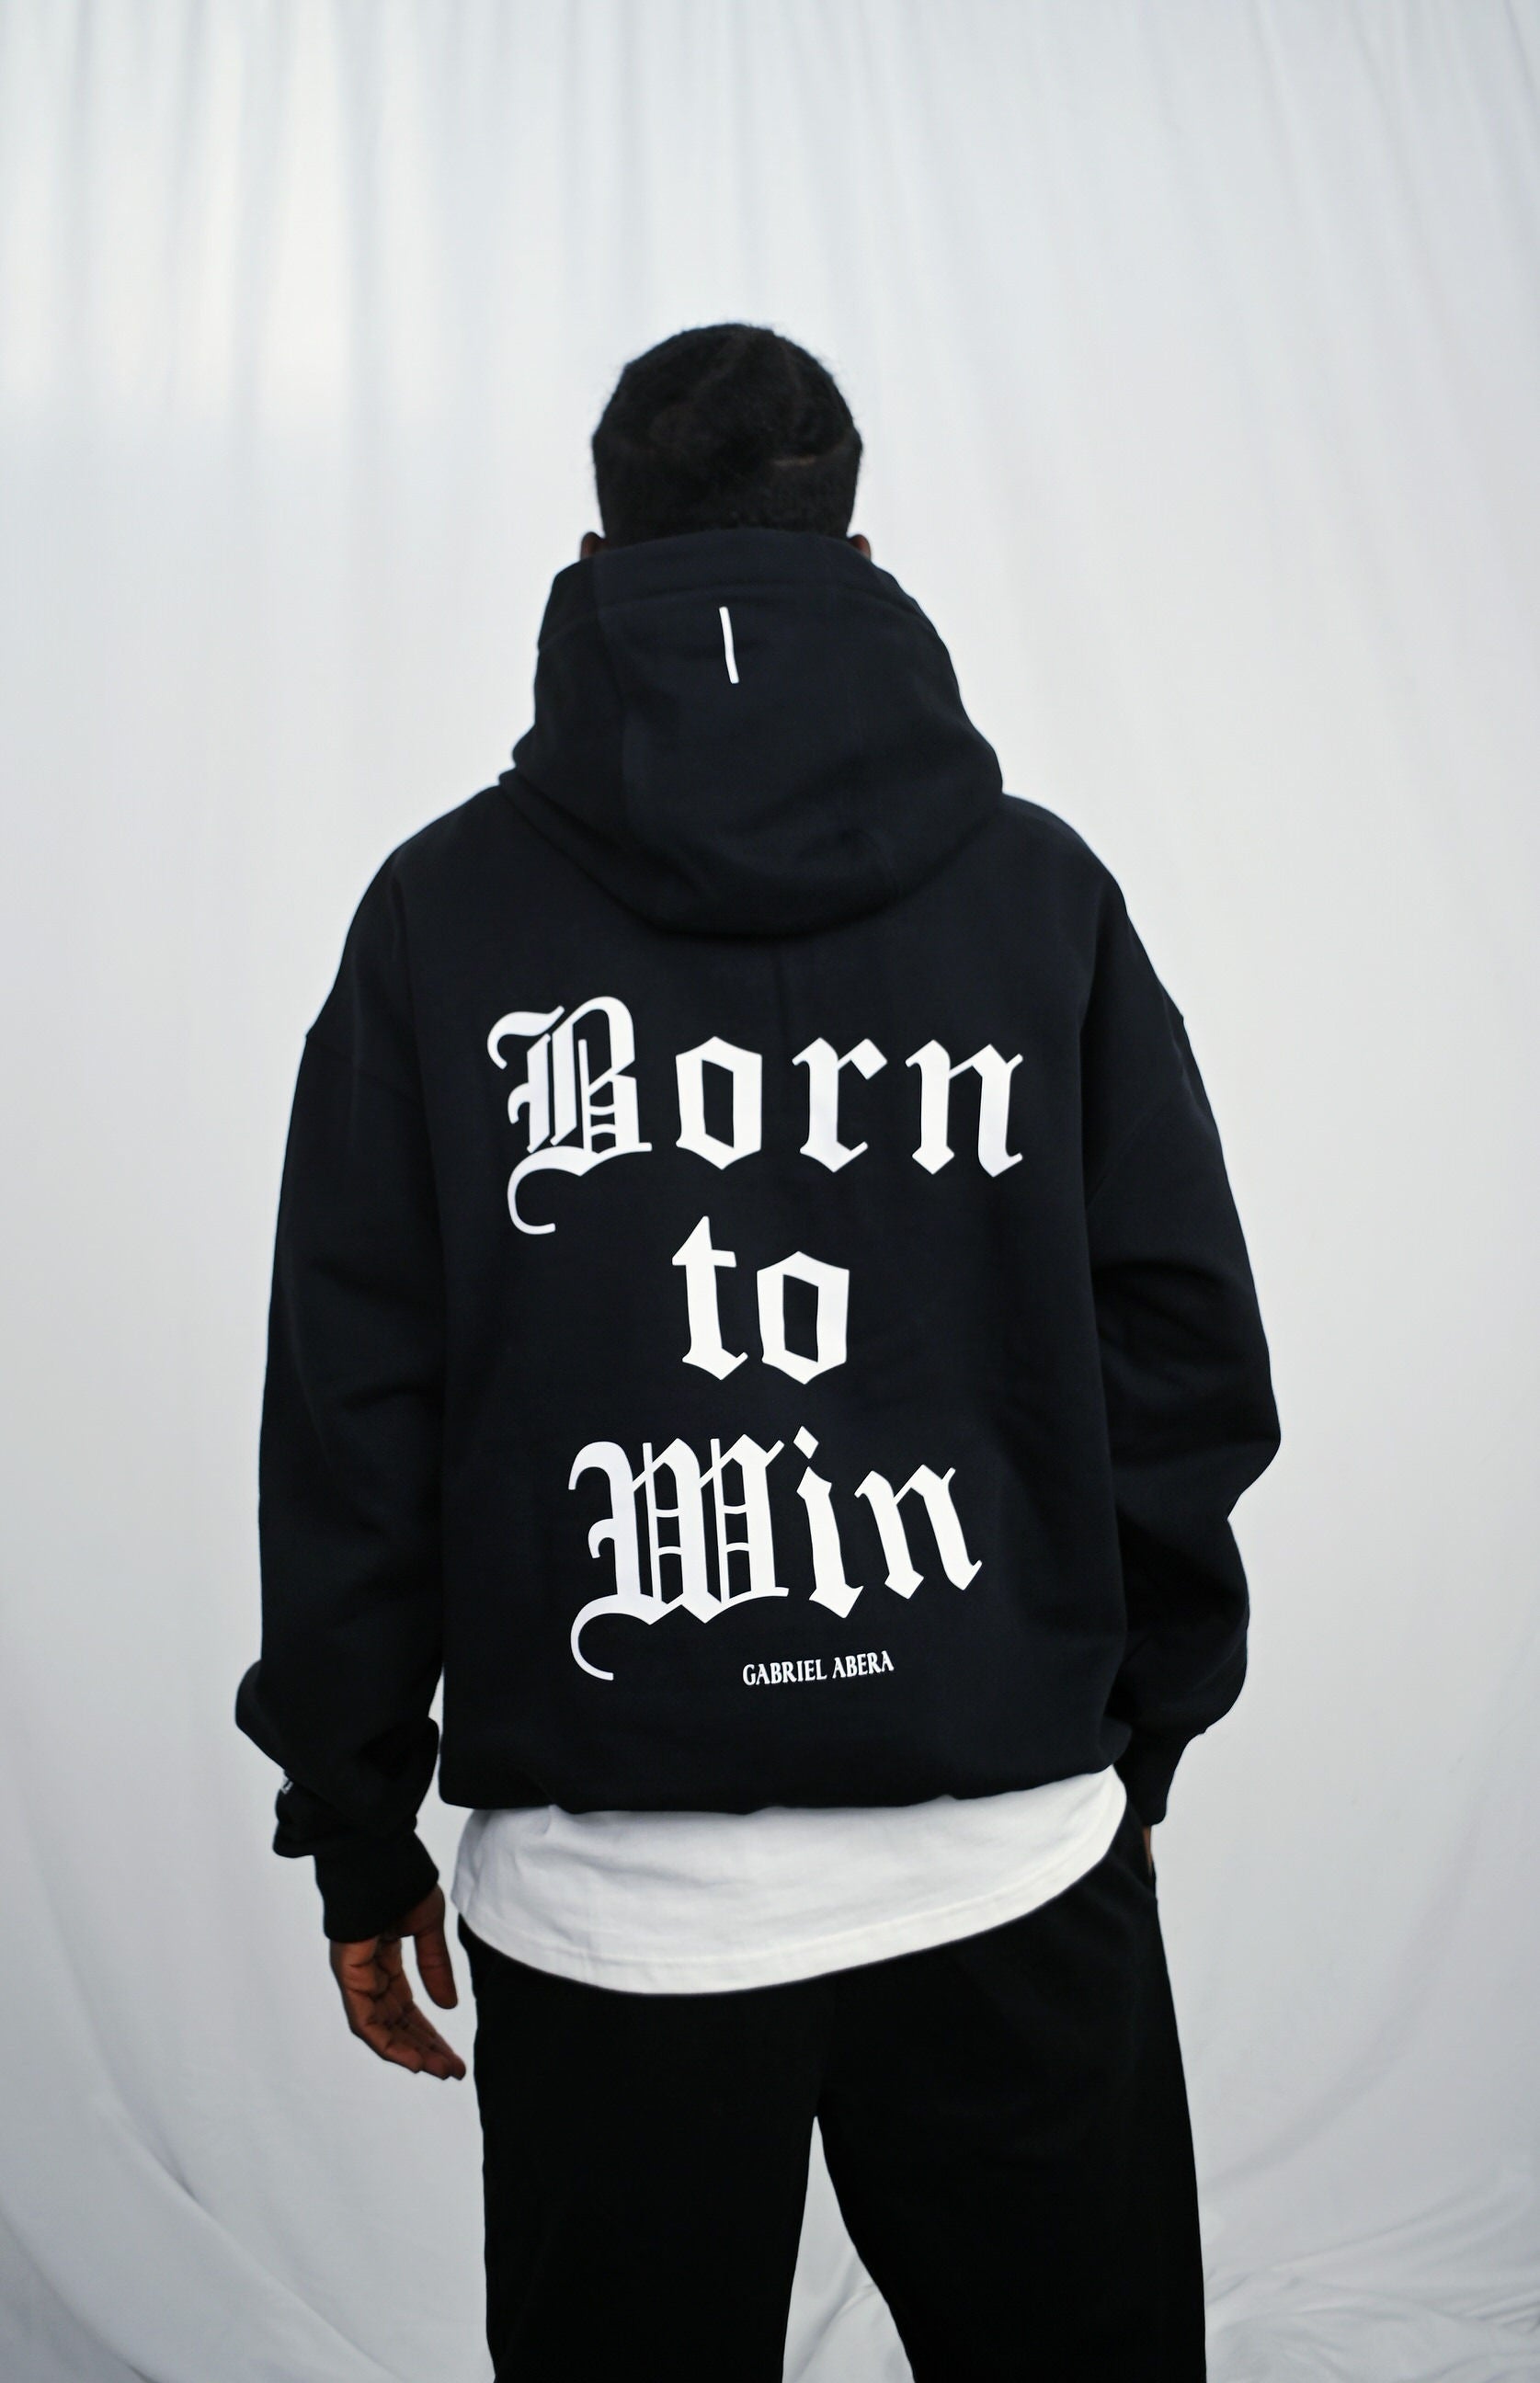 Male model wearing a Black oversize hoodie with white born to win design on the back